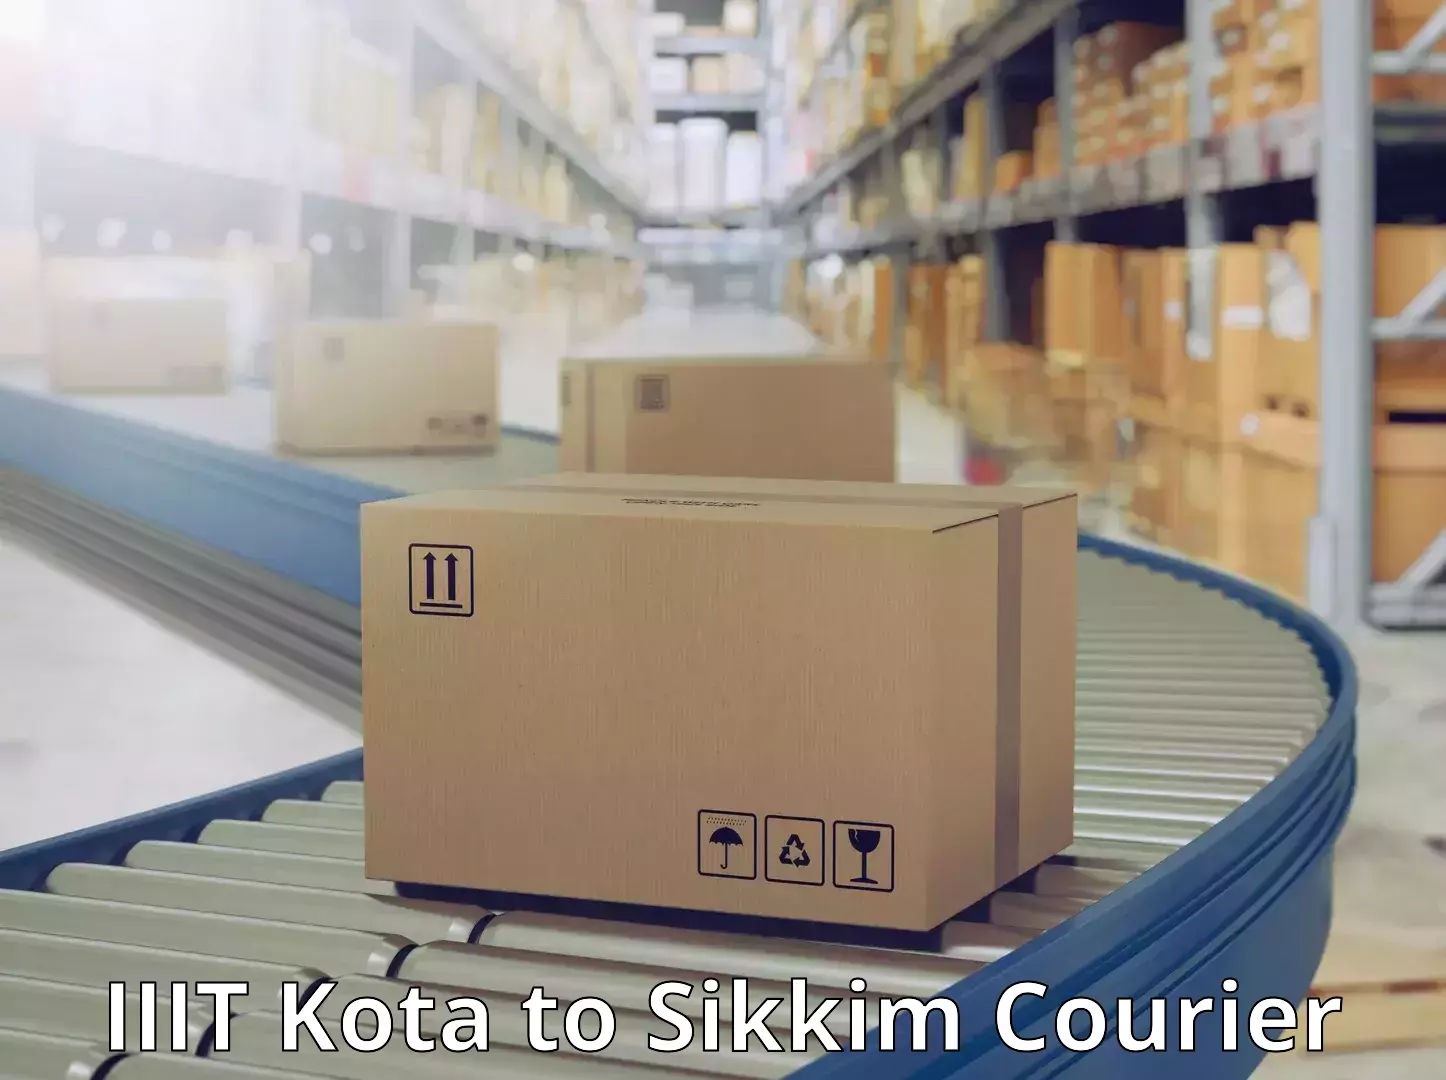 Full-service courier options IIIT Kota to Sikkim